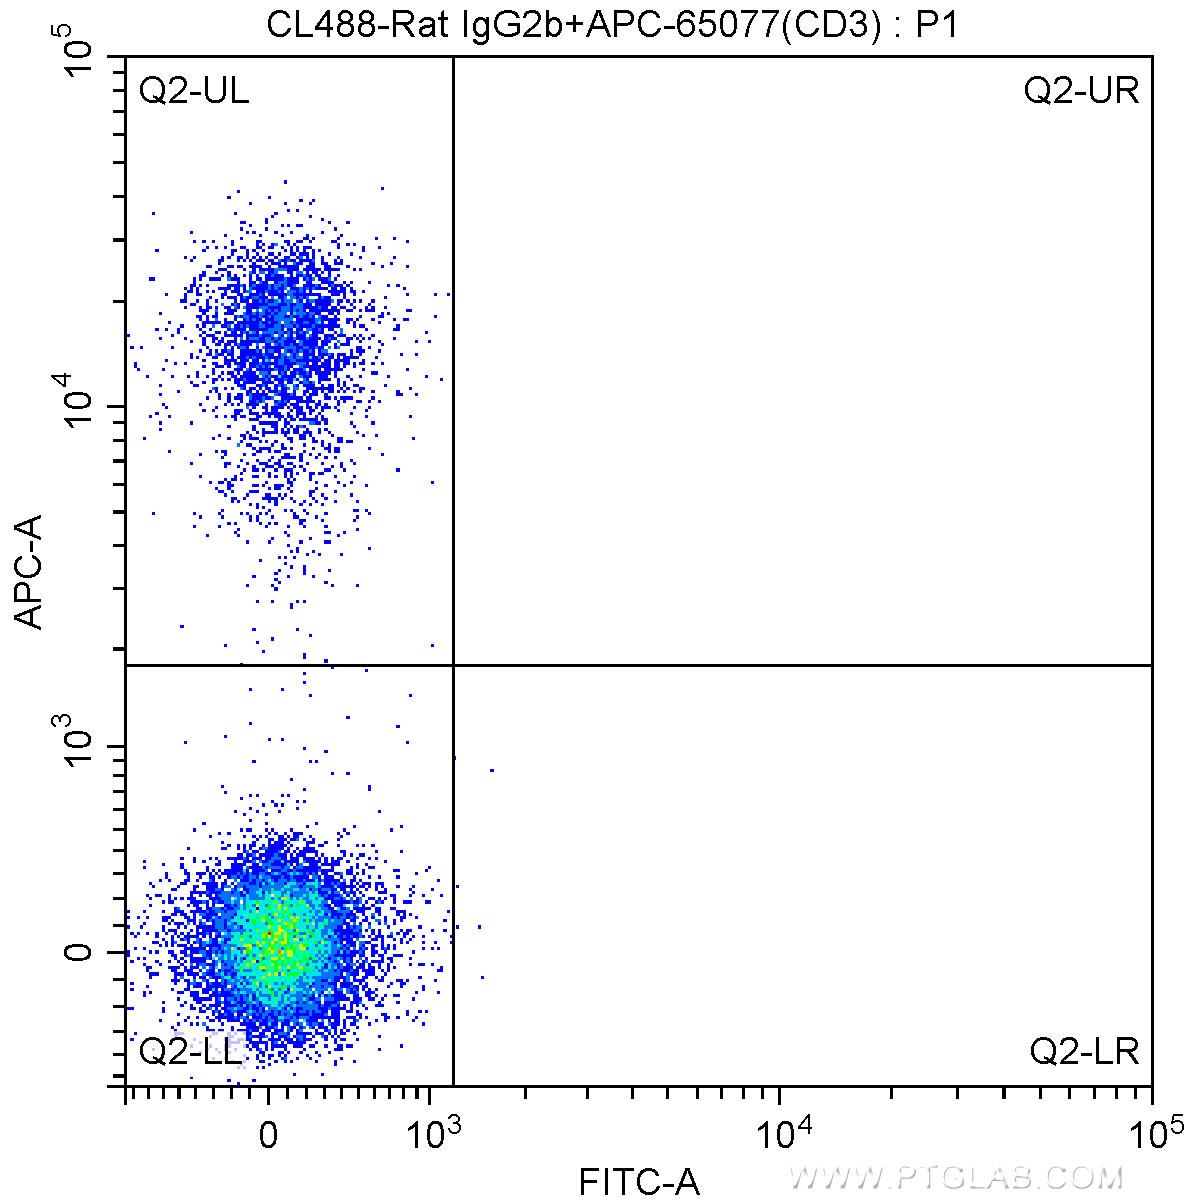 1X10^6 C57BL/6 mouse splenocytes were surface stained with APC-Anti-Mouse CD3 (APC-65077, Clone: 17A2) and CoraLite®488-conjugated Rat IgG2b isotype control antibody. Cells were not fixed.